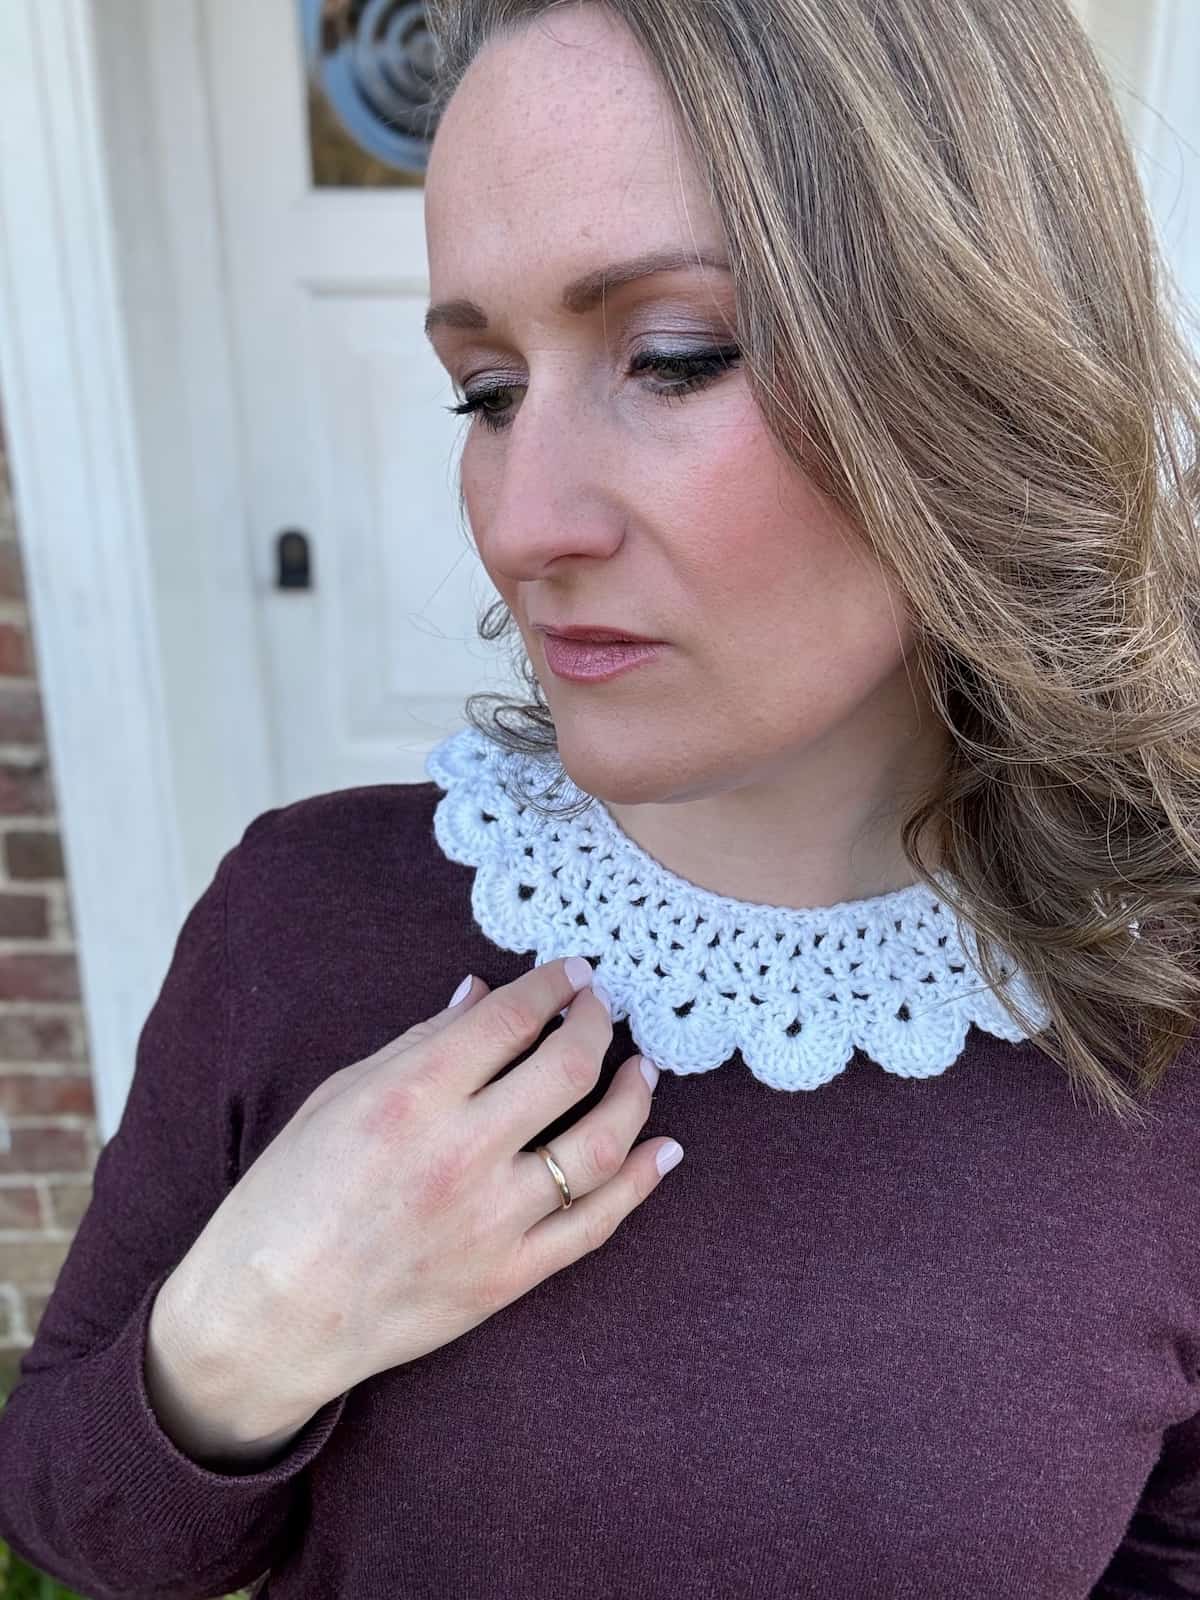 A woman wearing a burgundy sweater with a white lace collar.